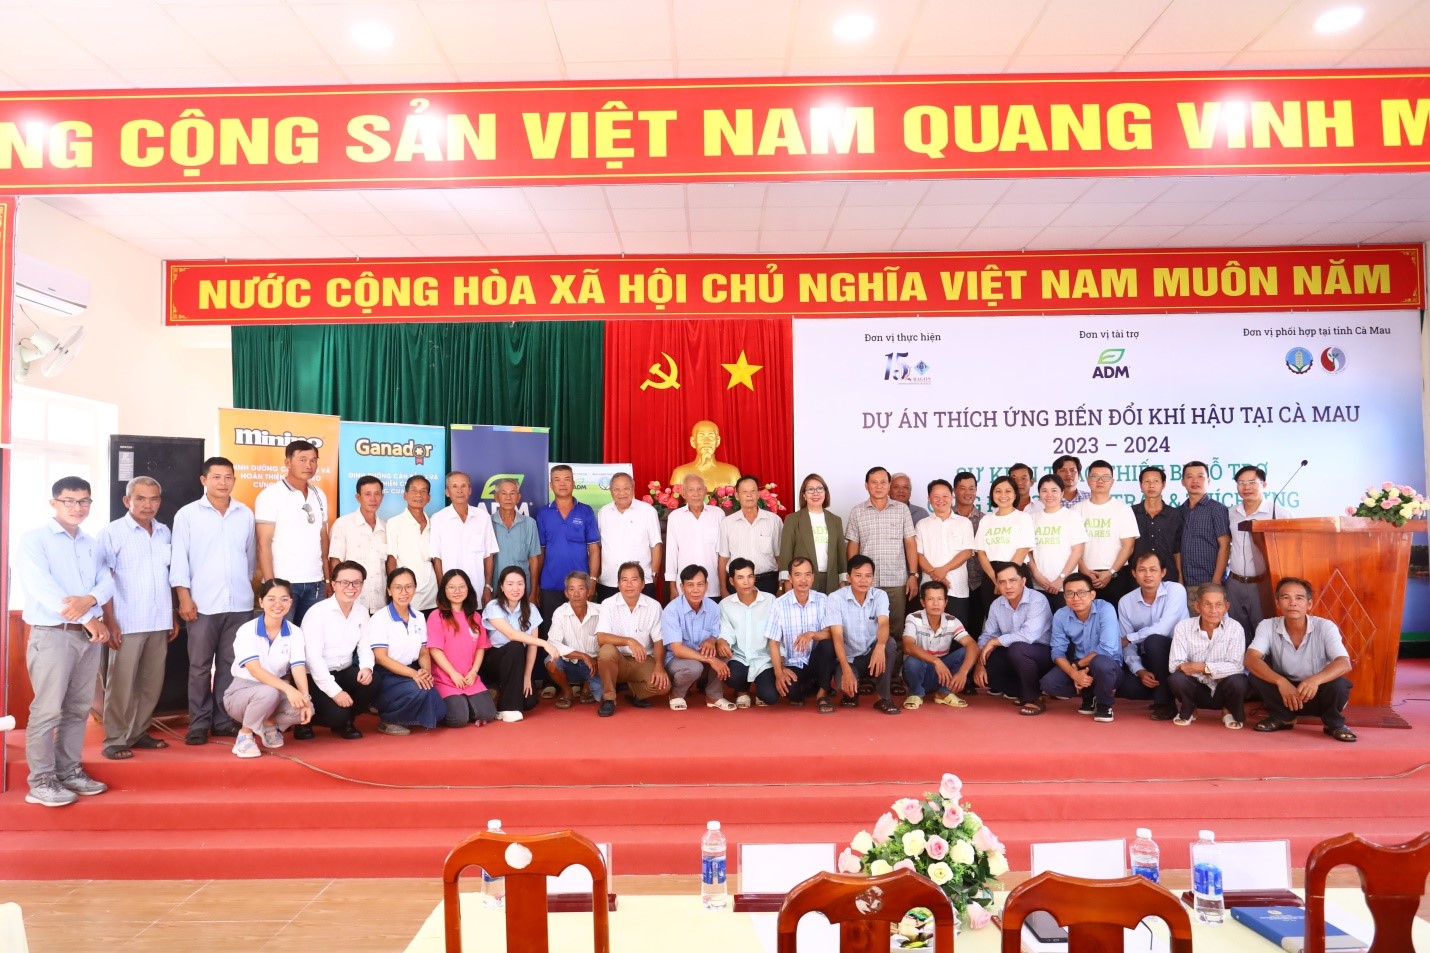 Ceremony Awarding Water Environment Monitoring Equipment to Support Climate Change Adaptation in Ca Mau